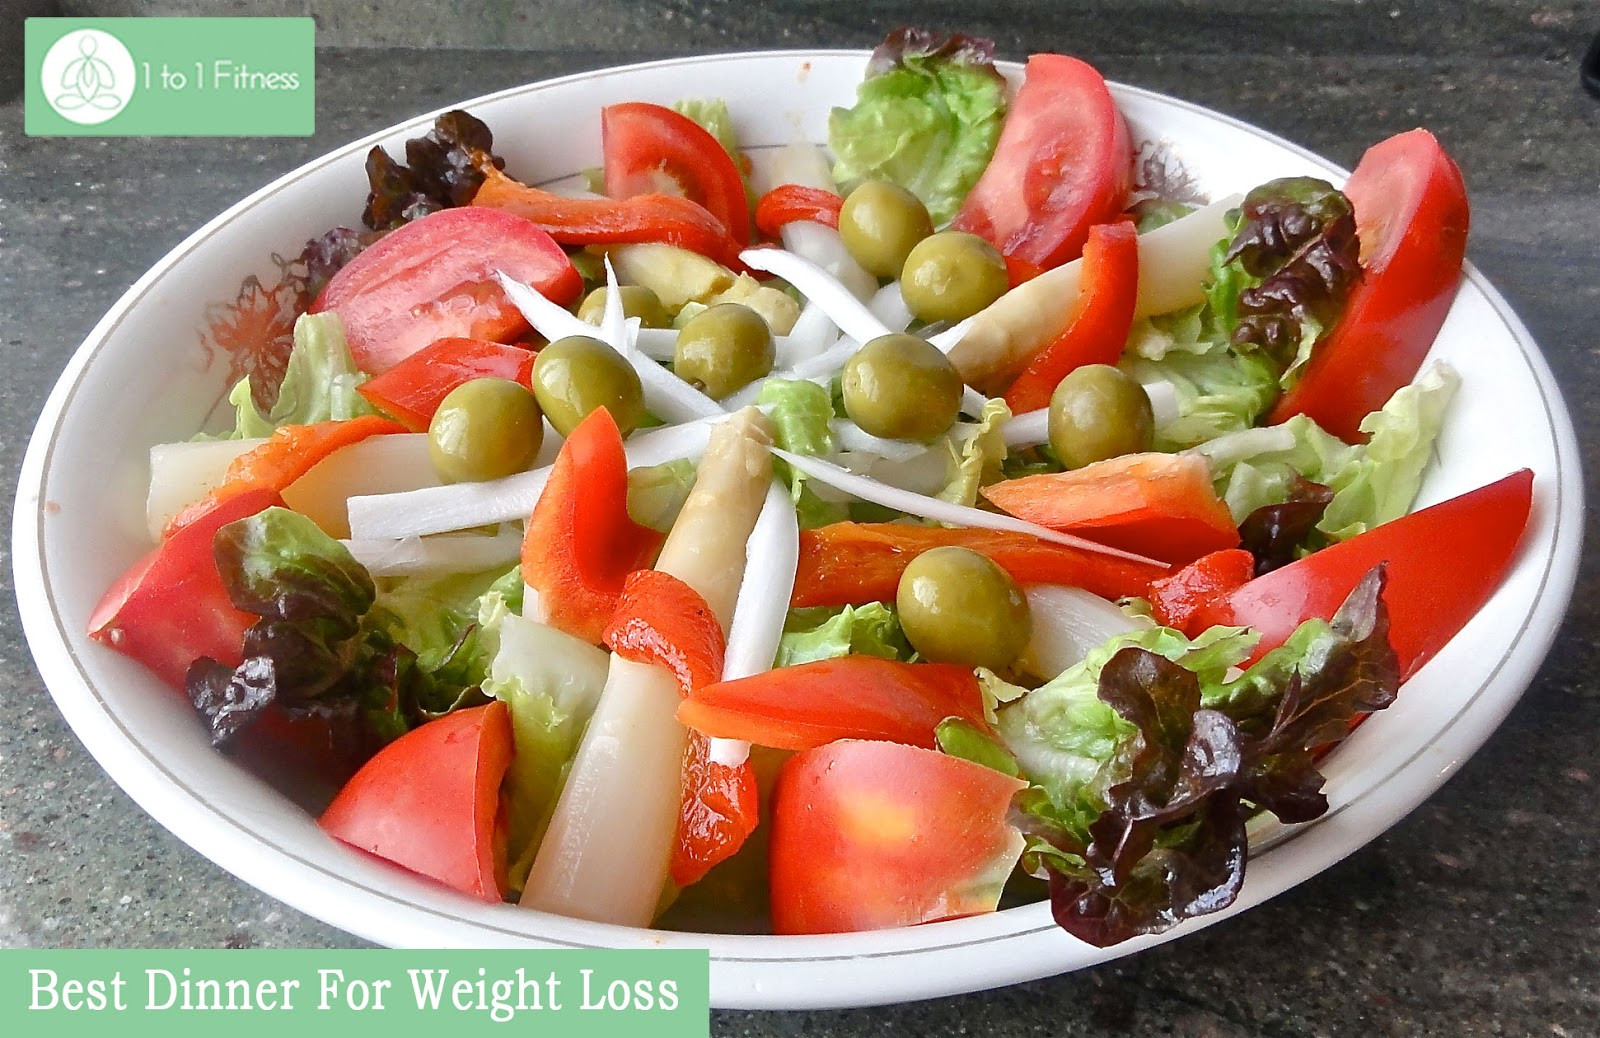 Best Salad Recipes For Weight Loss
 Which Is The Best Diet Plan For Weight Loss 1 to 1 Fitness